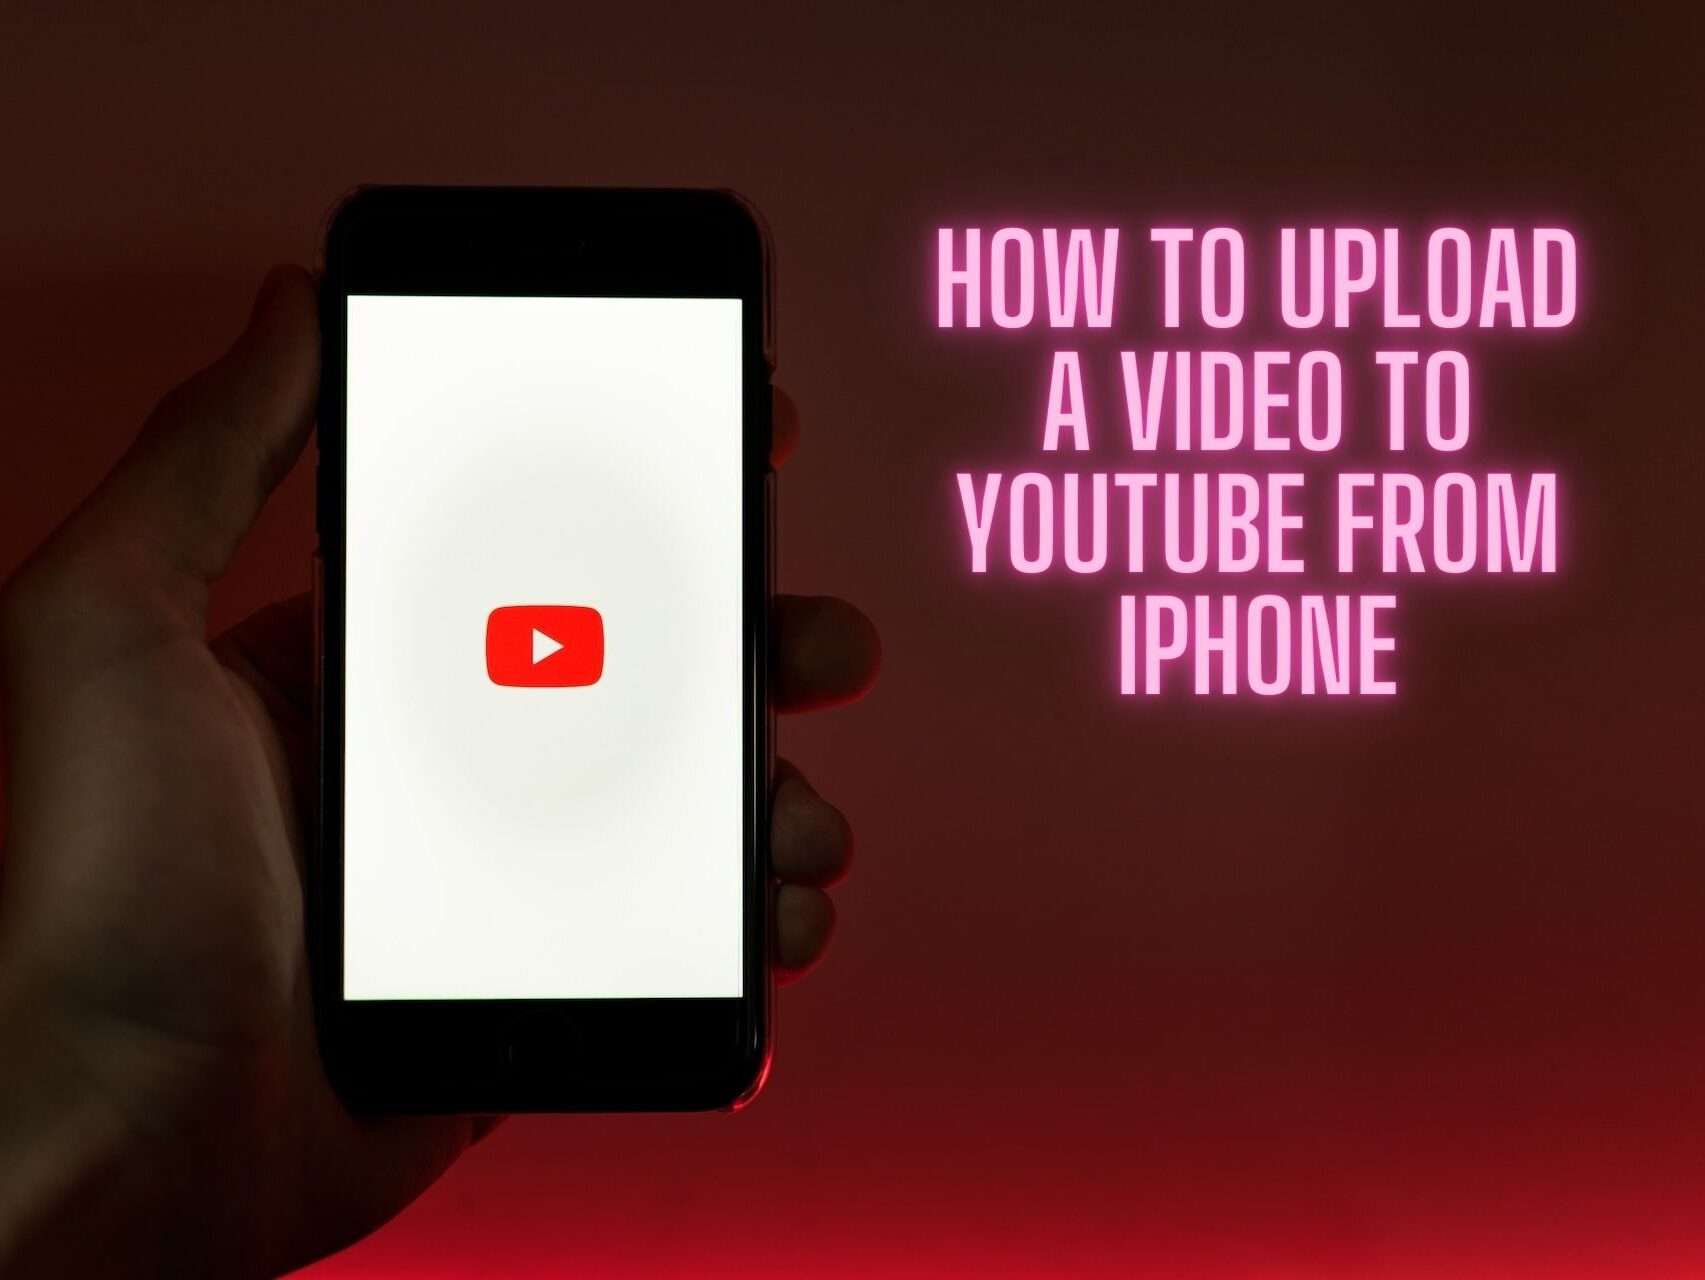 How to Upload a Video to YouTube from iPhone